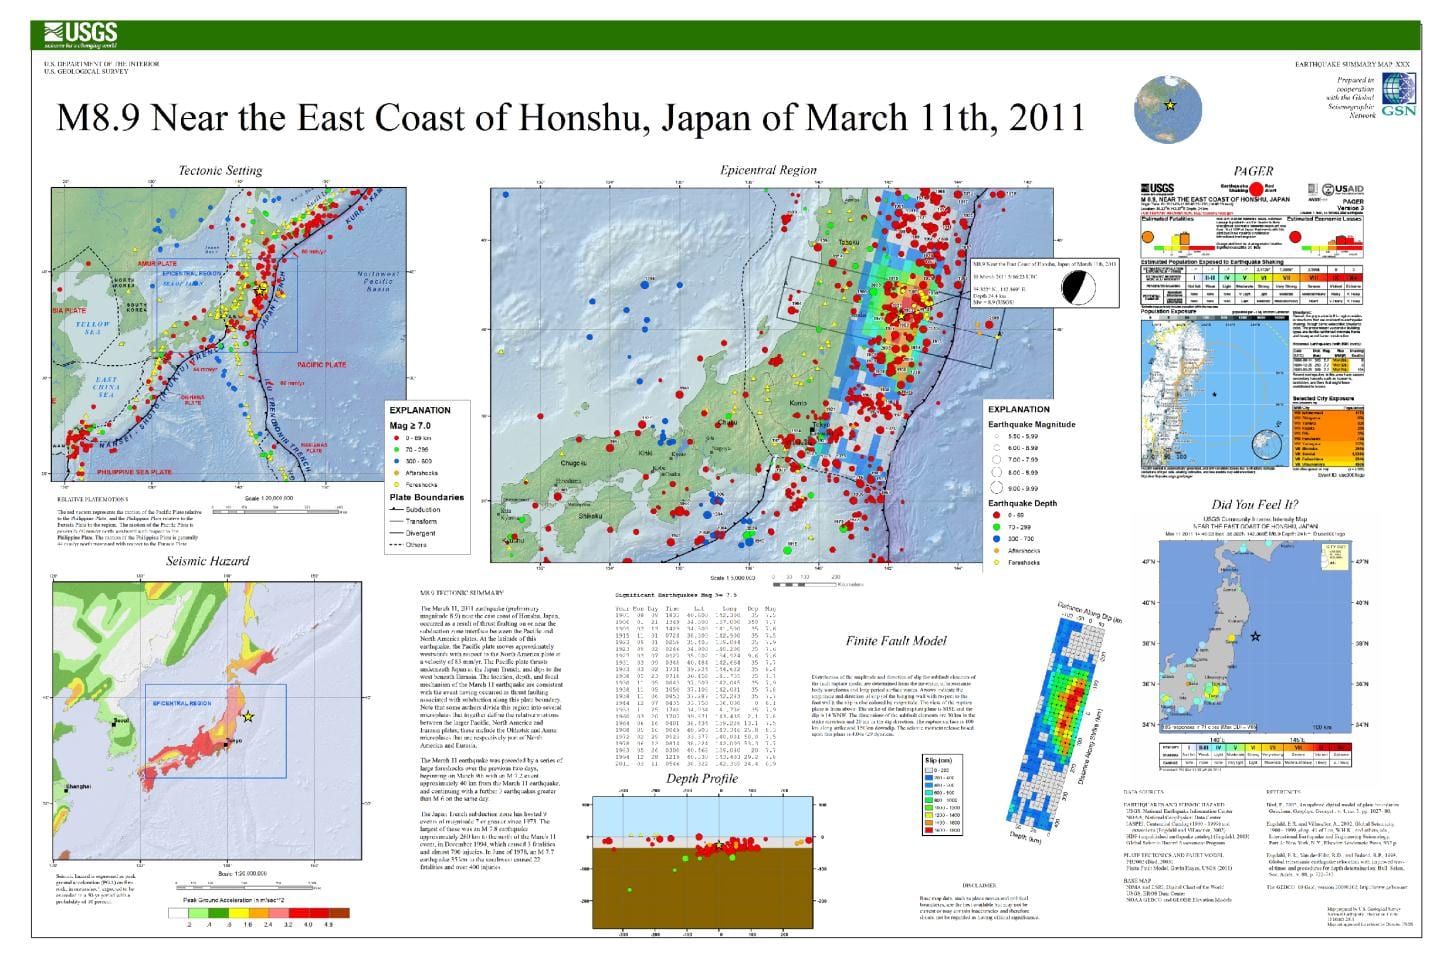 This Poster of the Near the East Coast of Honshu, Japan Earthquake of 11 March 2011 - Magnitude 8.9, created by the USGS, pulls together imagery and information related not only to the March 11 event but also to foreshocks that were felt during preceding days.